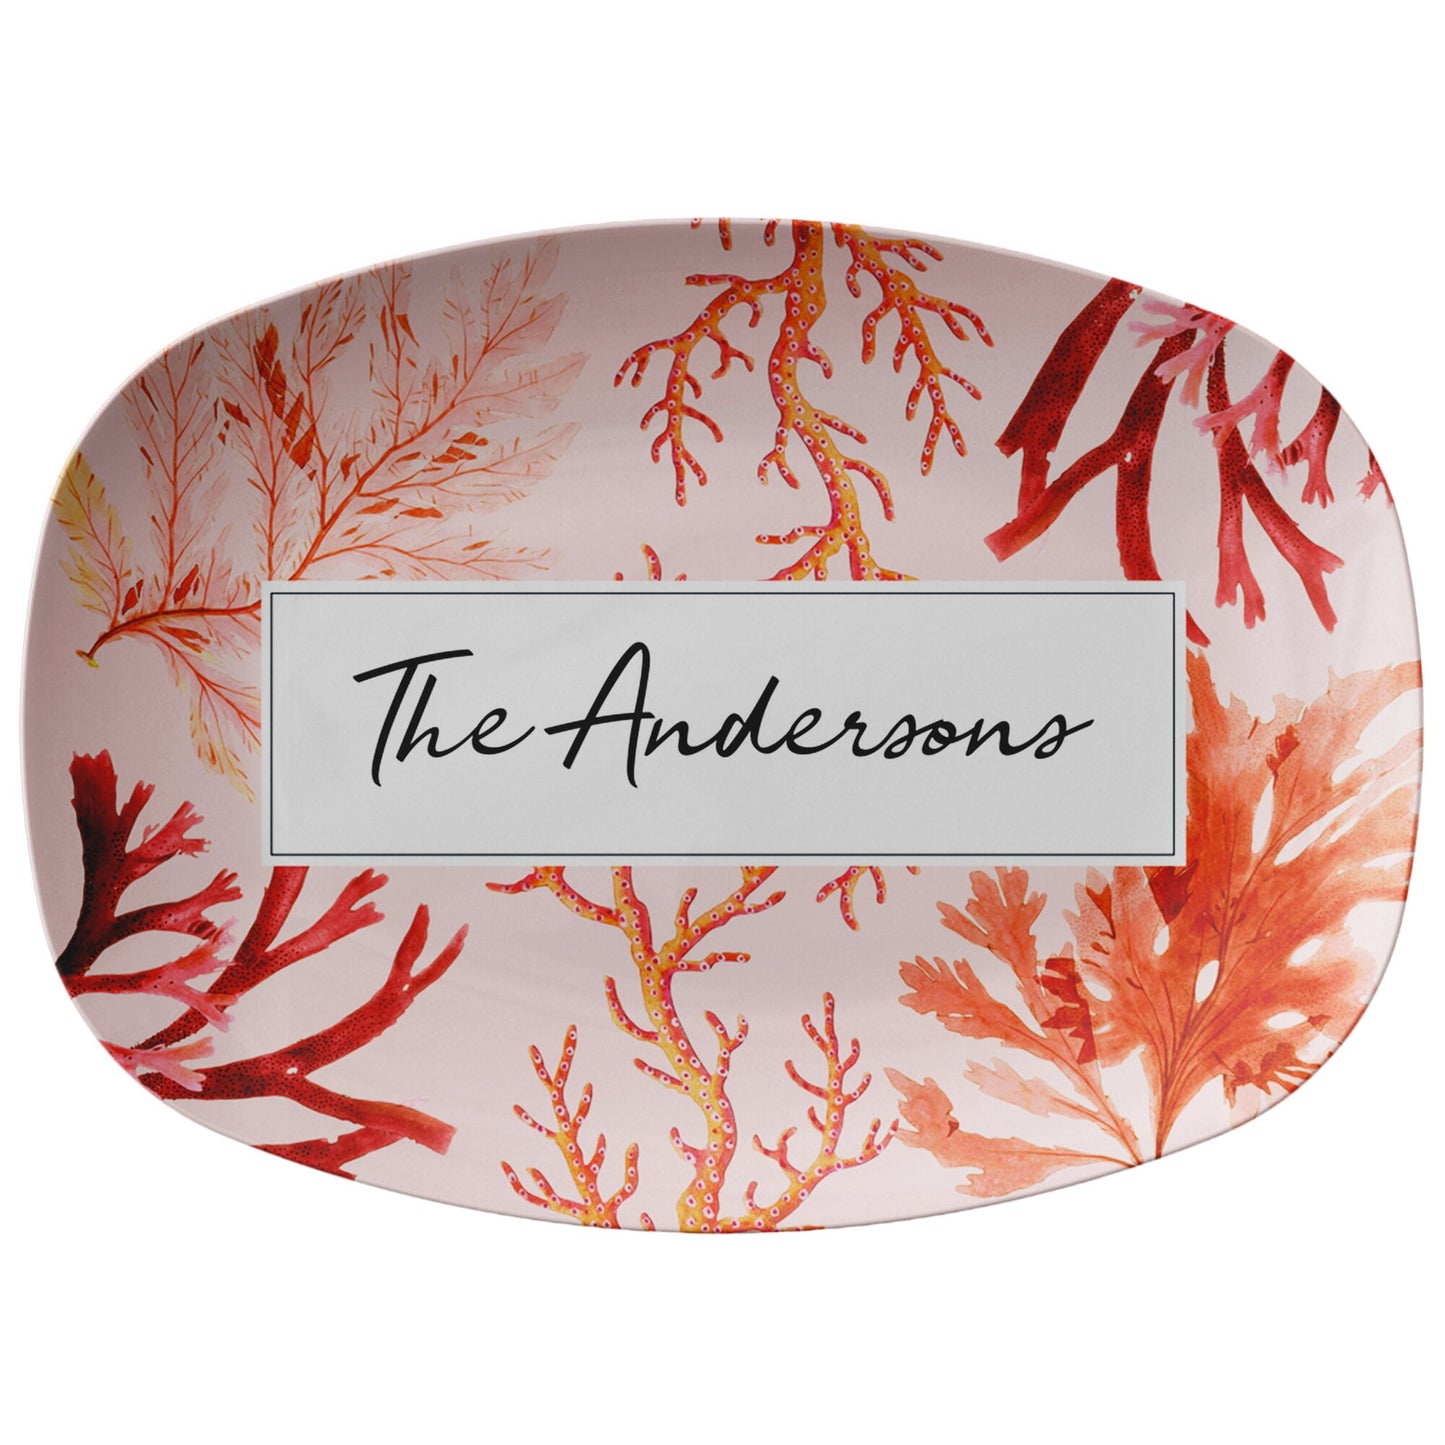 Coral reef inspired serving platter in pink, orange and red personalized with any name or word.